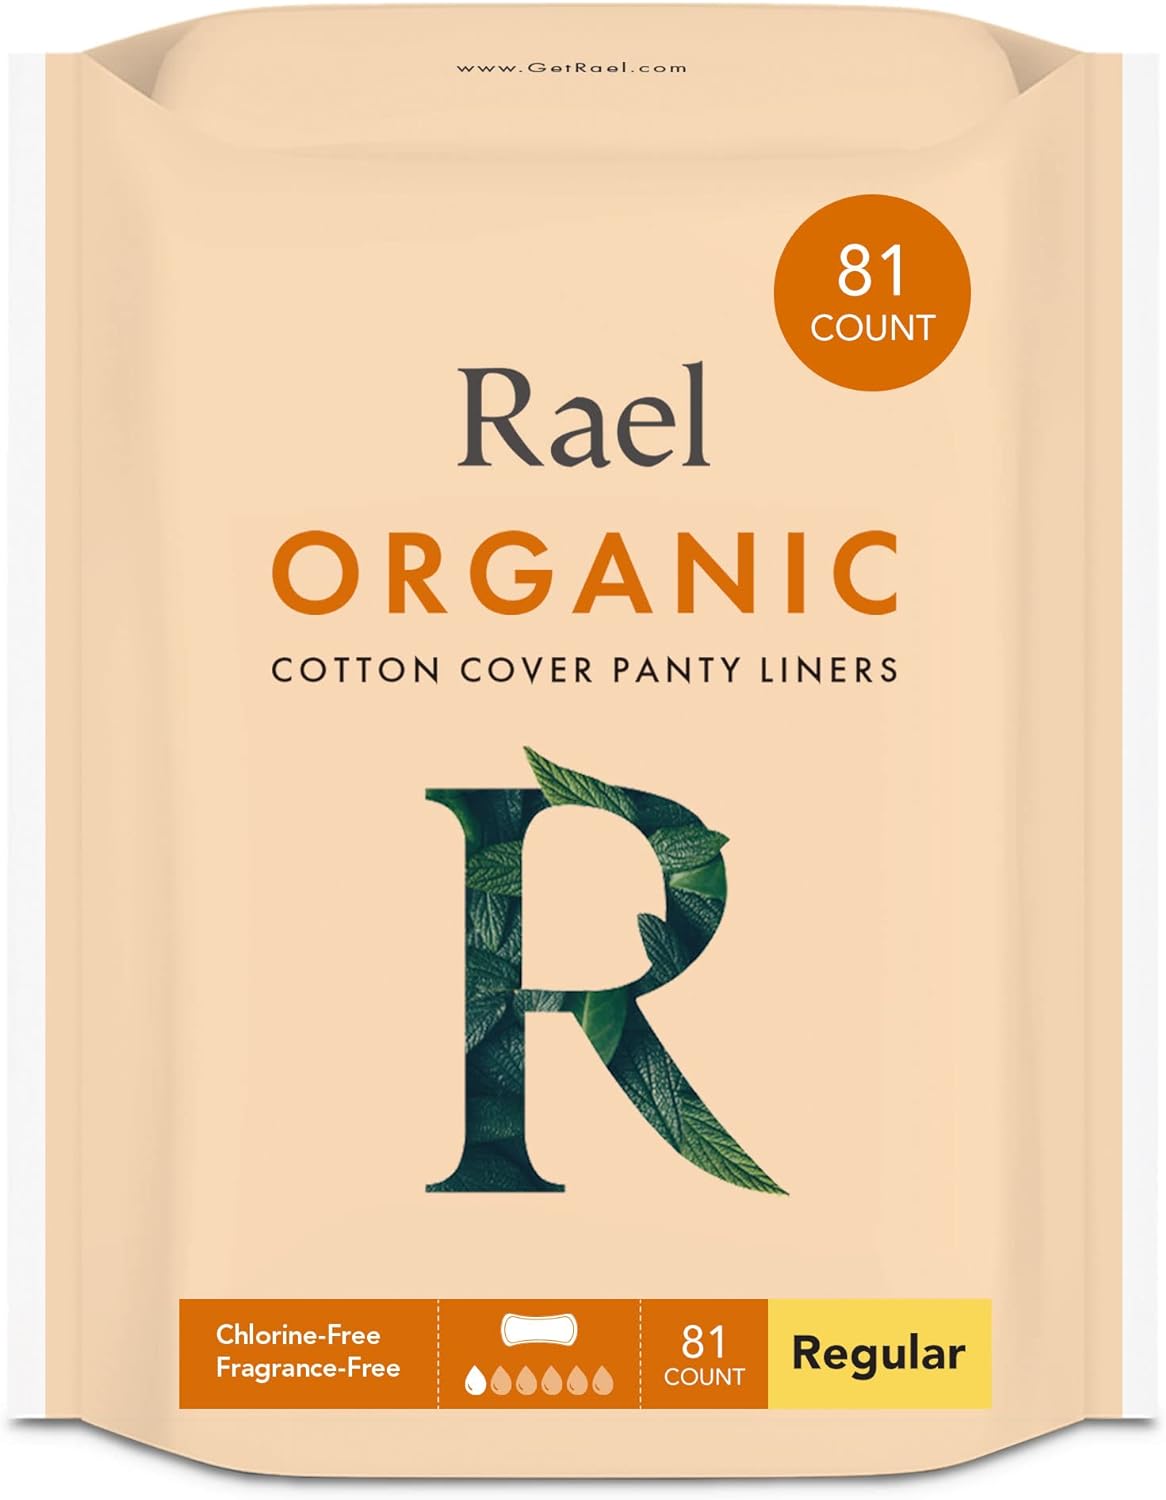 Rael Panty Liners for Women, Organic Cotton Cover - Regular Pantiliners, Light Absorbency, Unscented, Chlorine Free (Regular, 81 Count)